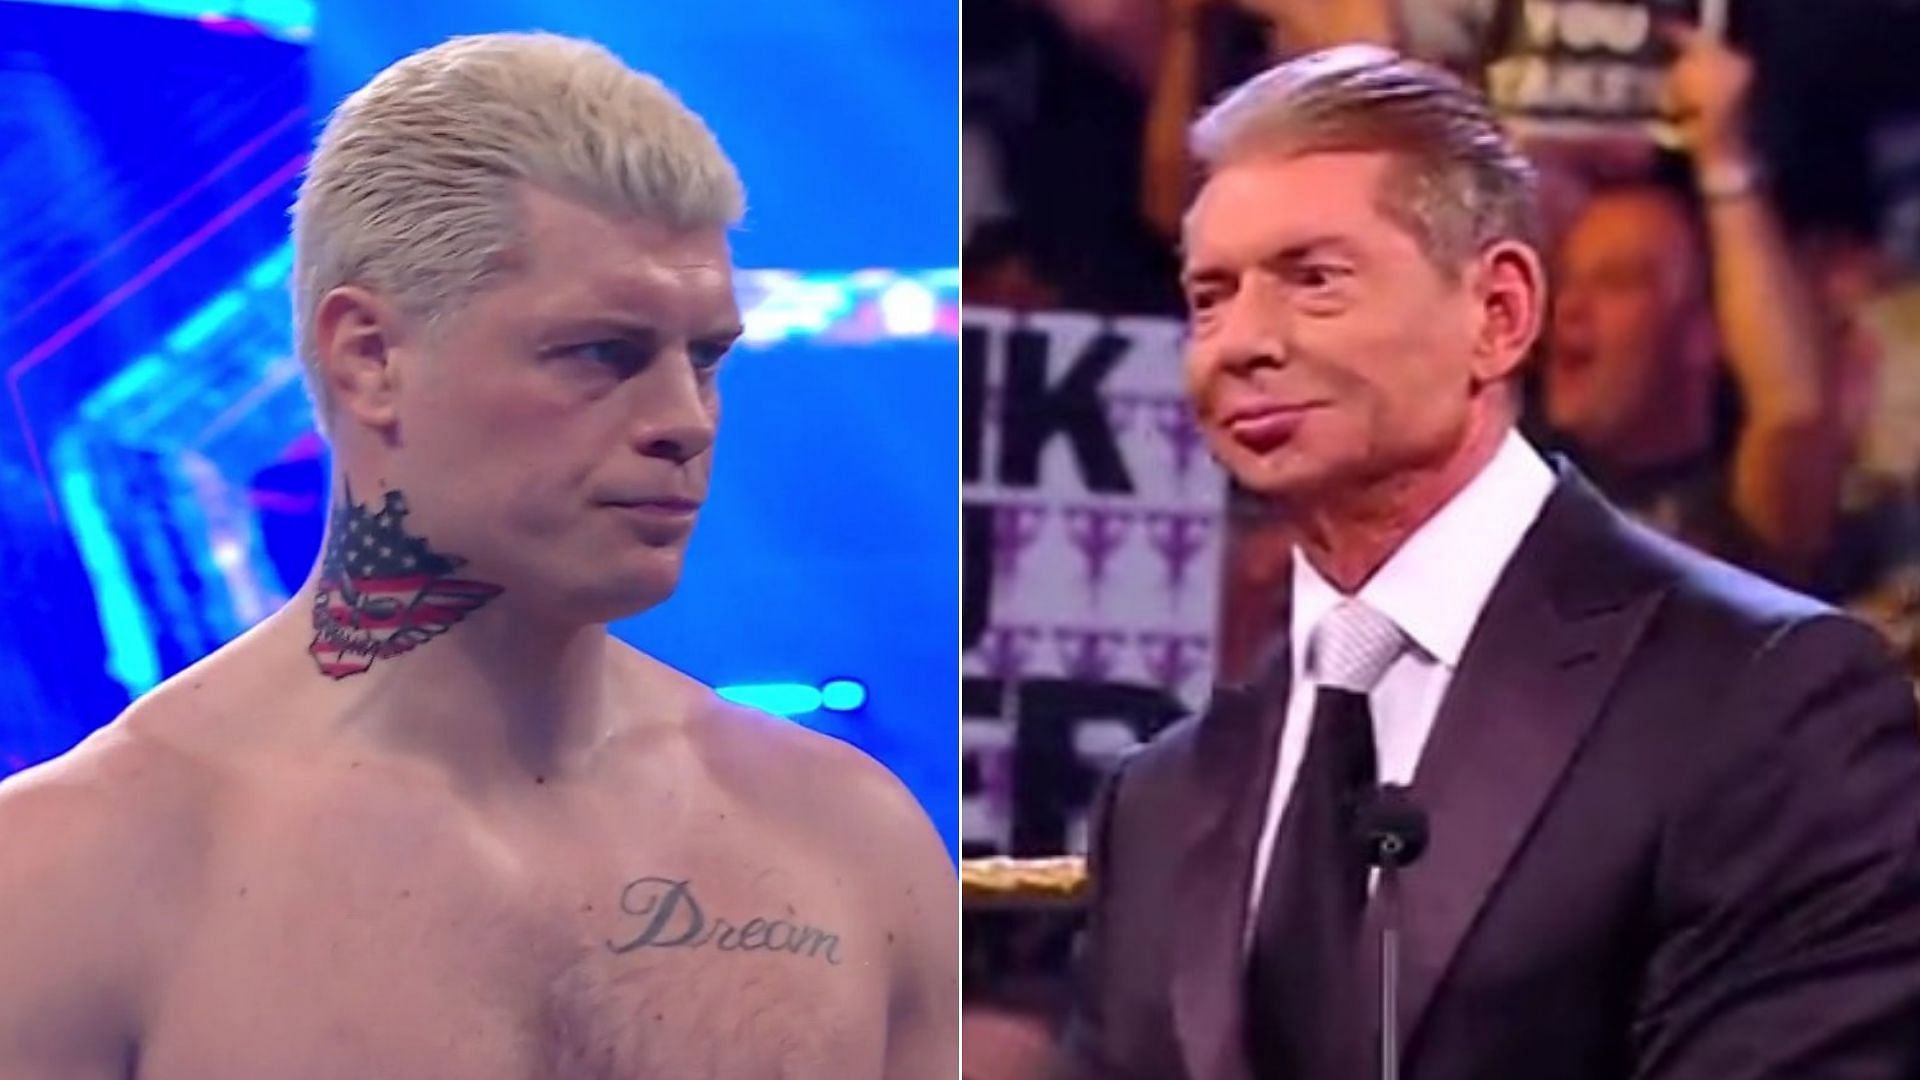 Cody Rhodes had several conversations with Vince McMahon ahead of his return.